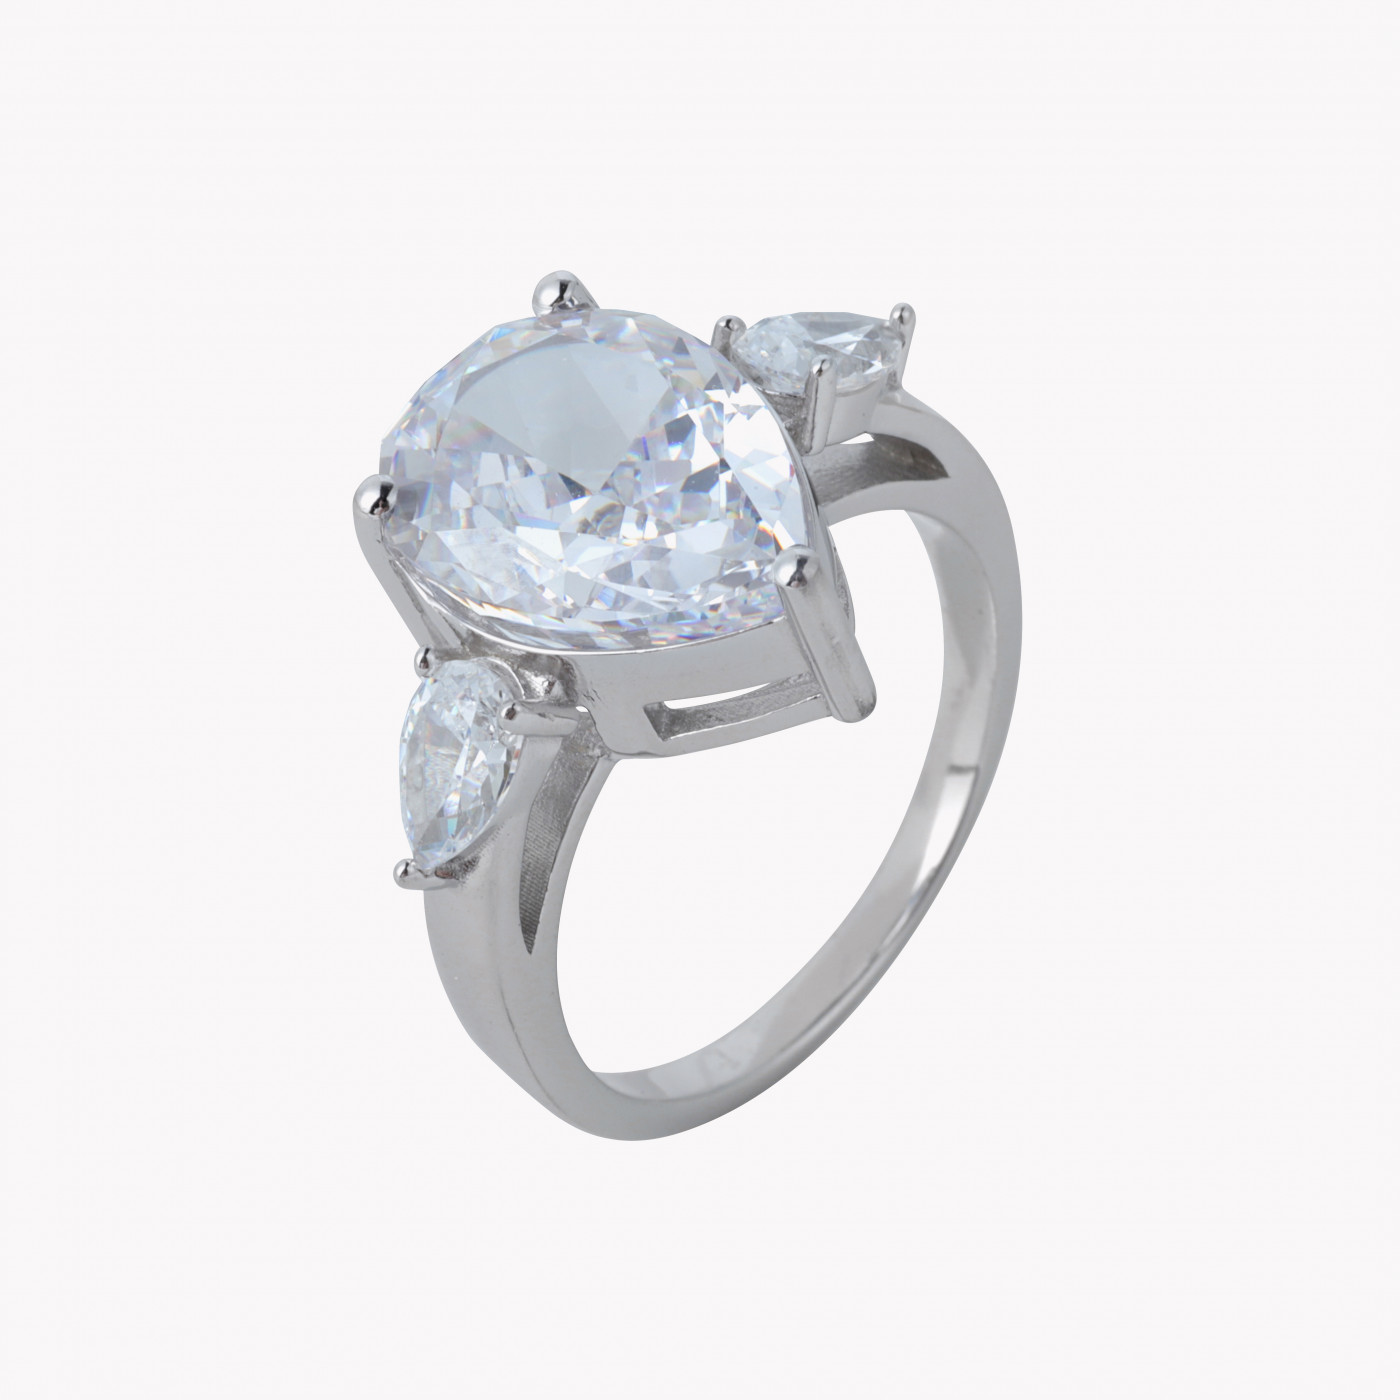 S925 Sterling Silver Simulation Diamond Ring - Hunny Life